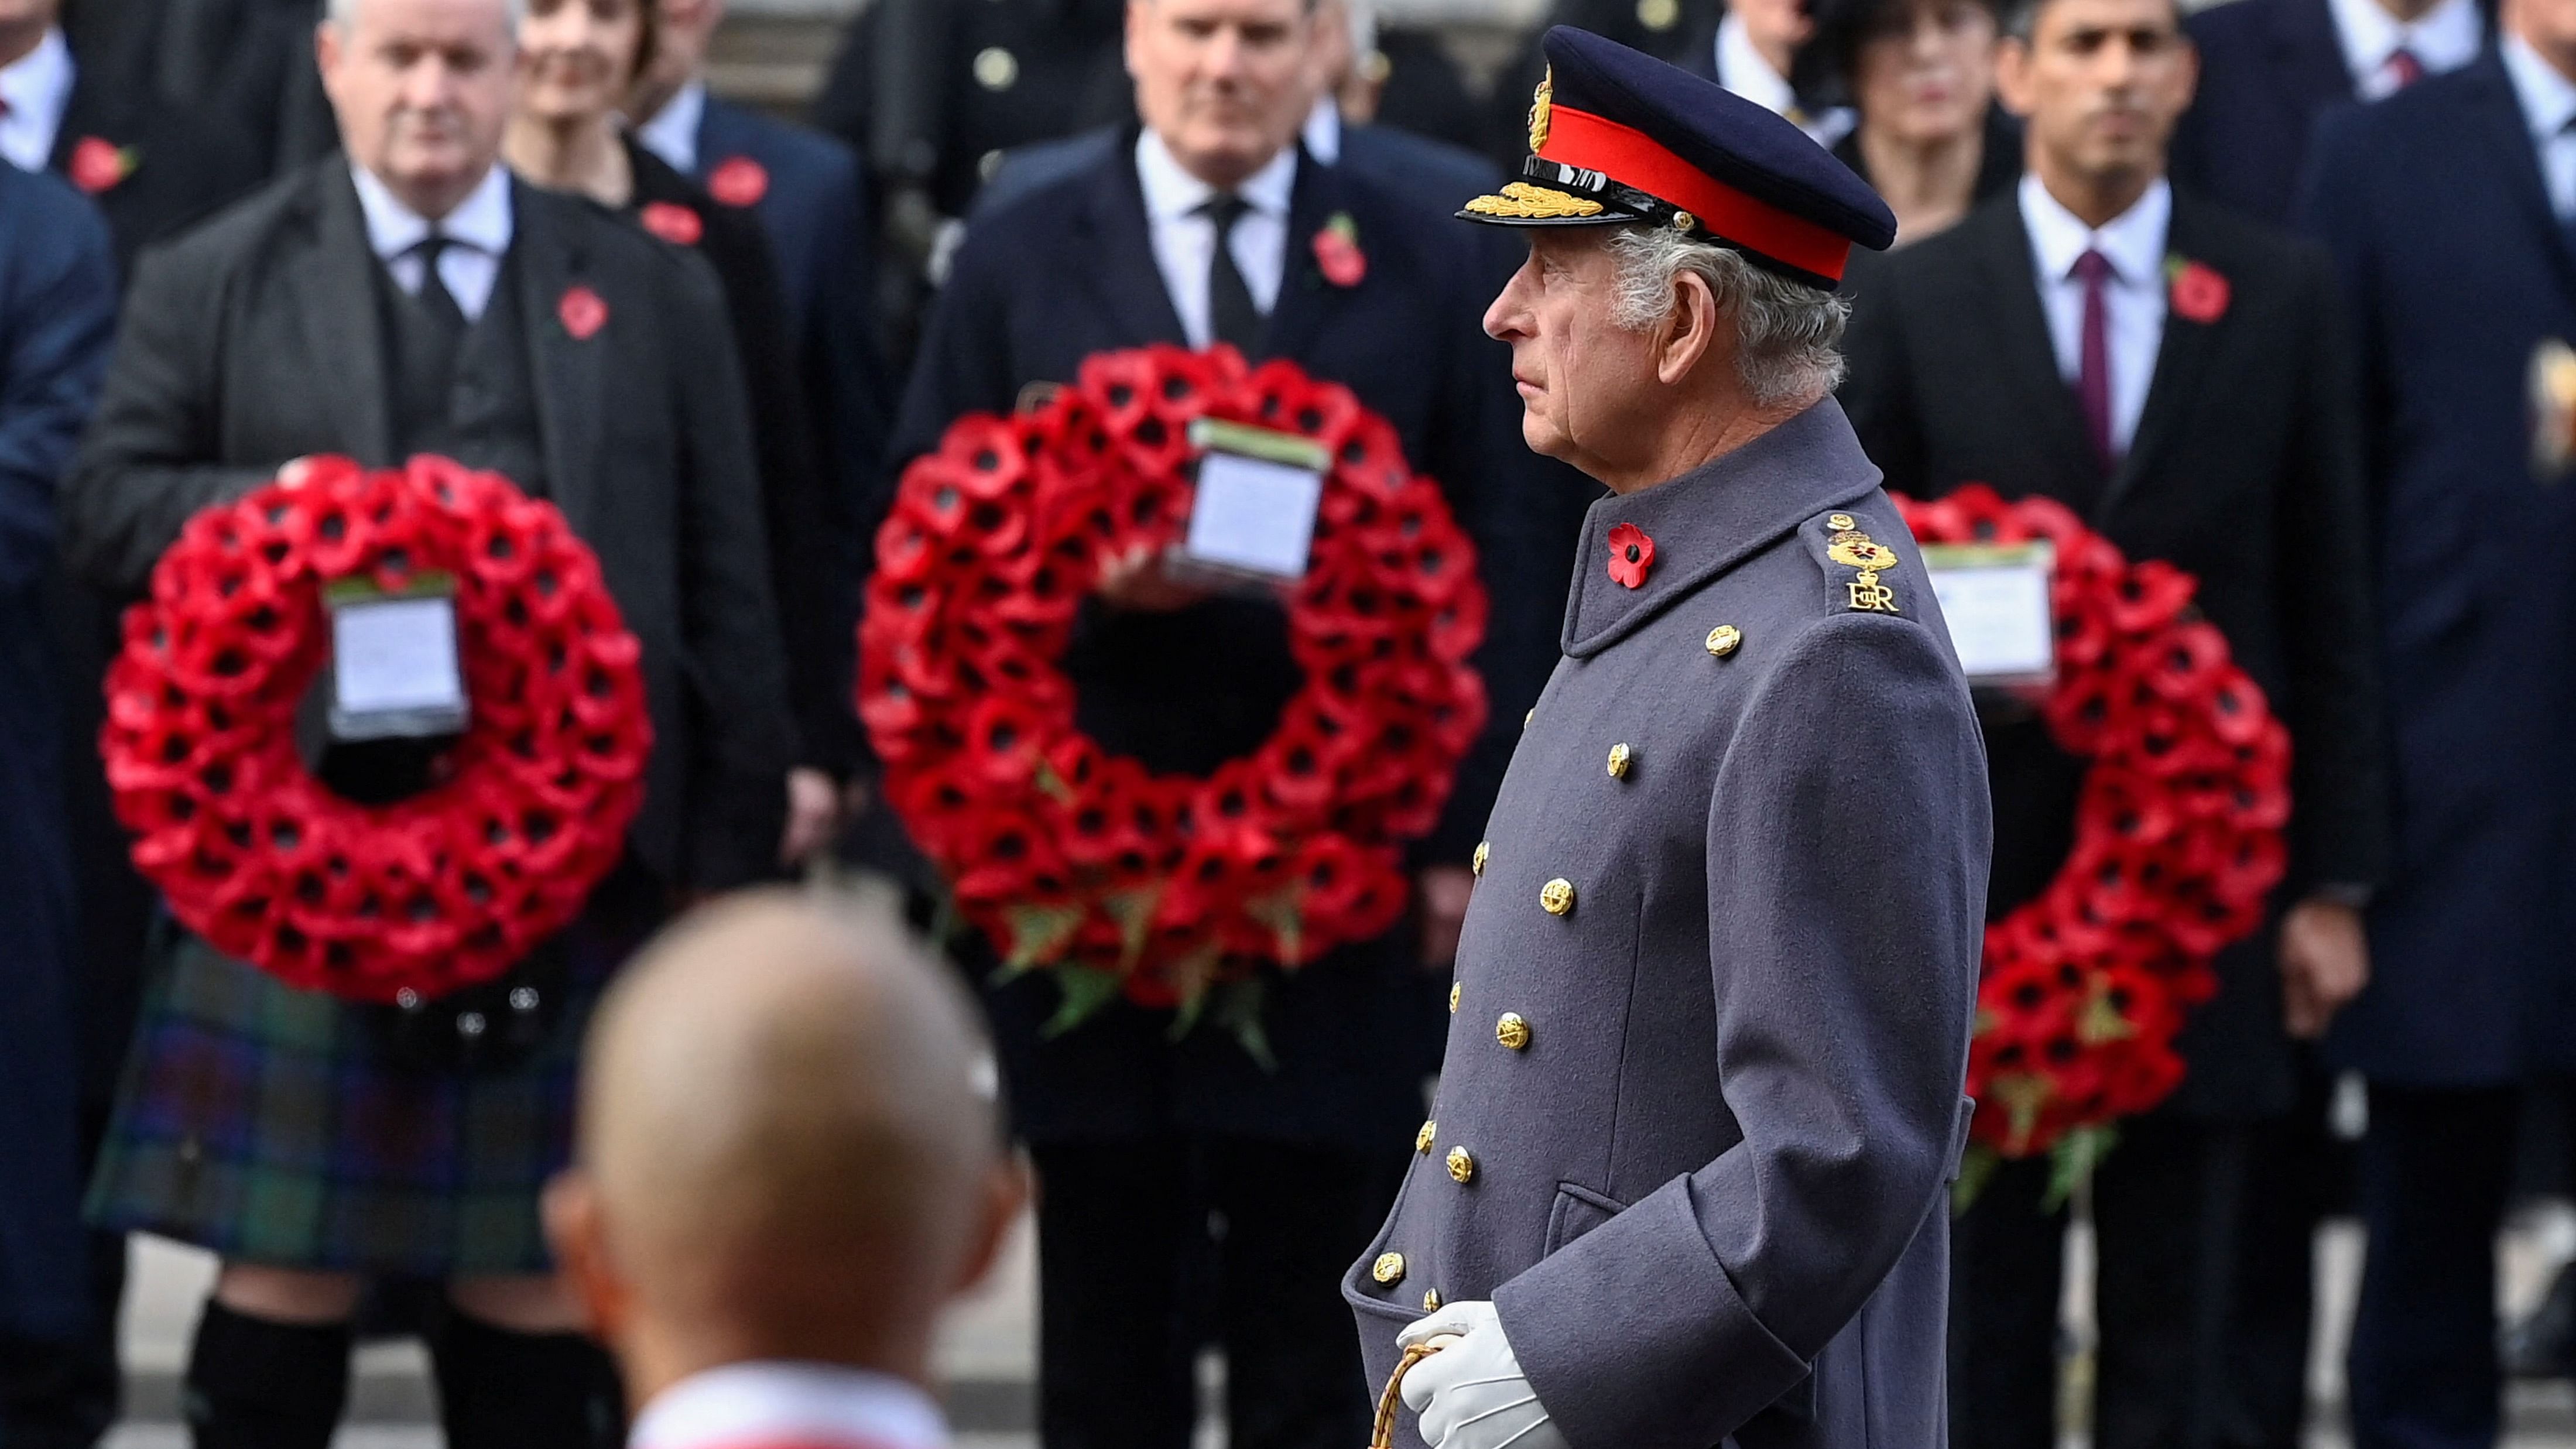 Now king and commander-in-chief of British forces, he laid his first wreath at the war memorial as reigning monarch, dressed in a field marshal's ceremonial uniform. Credit: AFP Photo